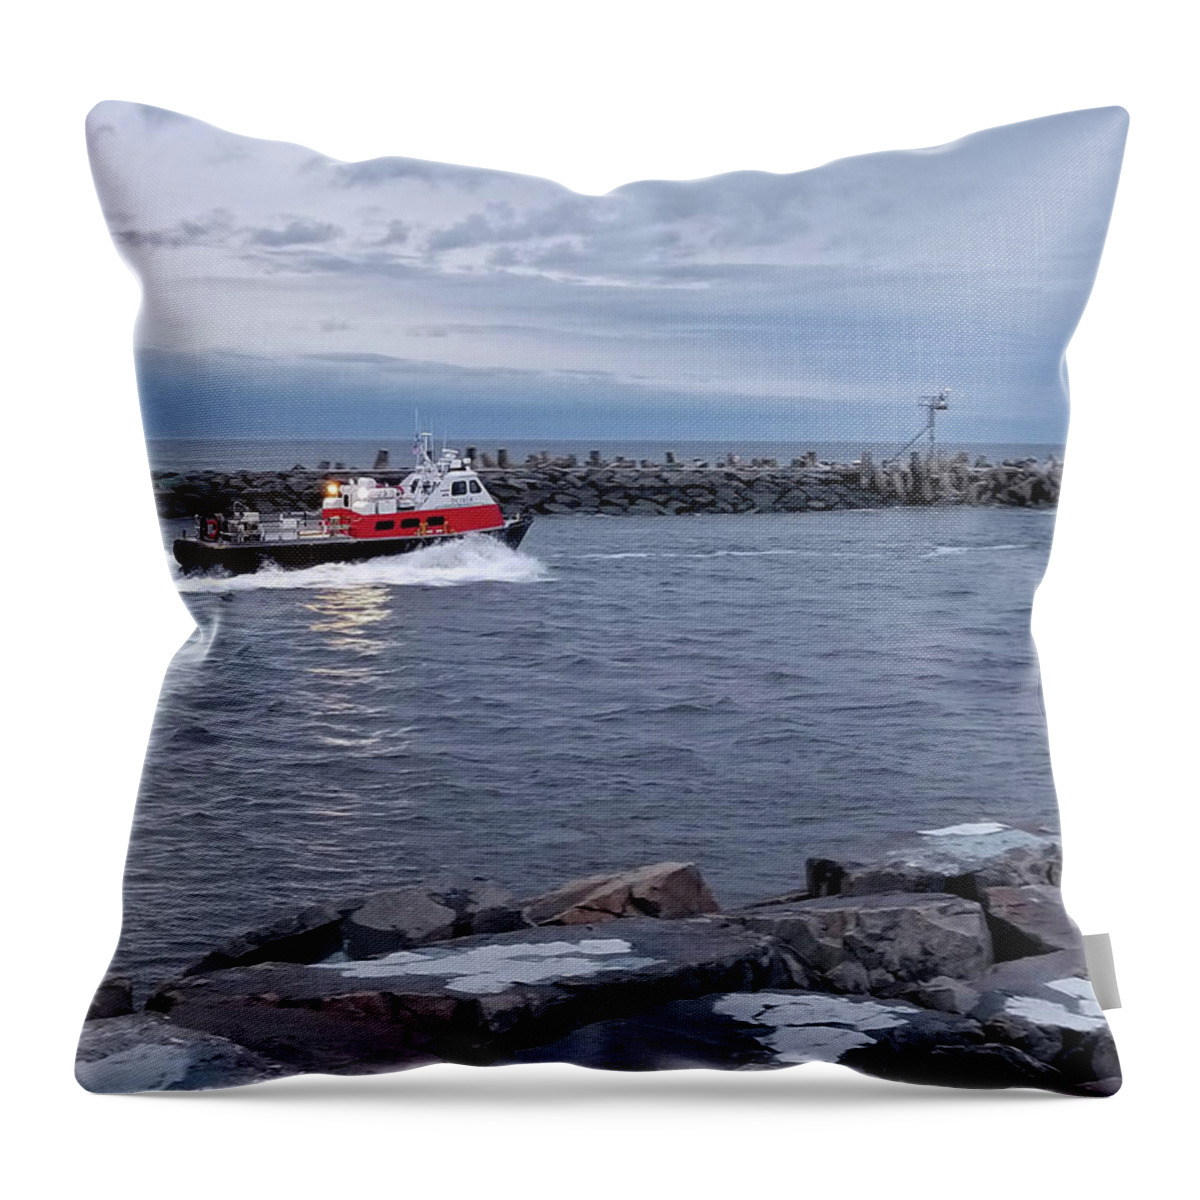 Landscape Throw Pillow featuring the photograph Olivia by Sami Martin